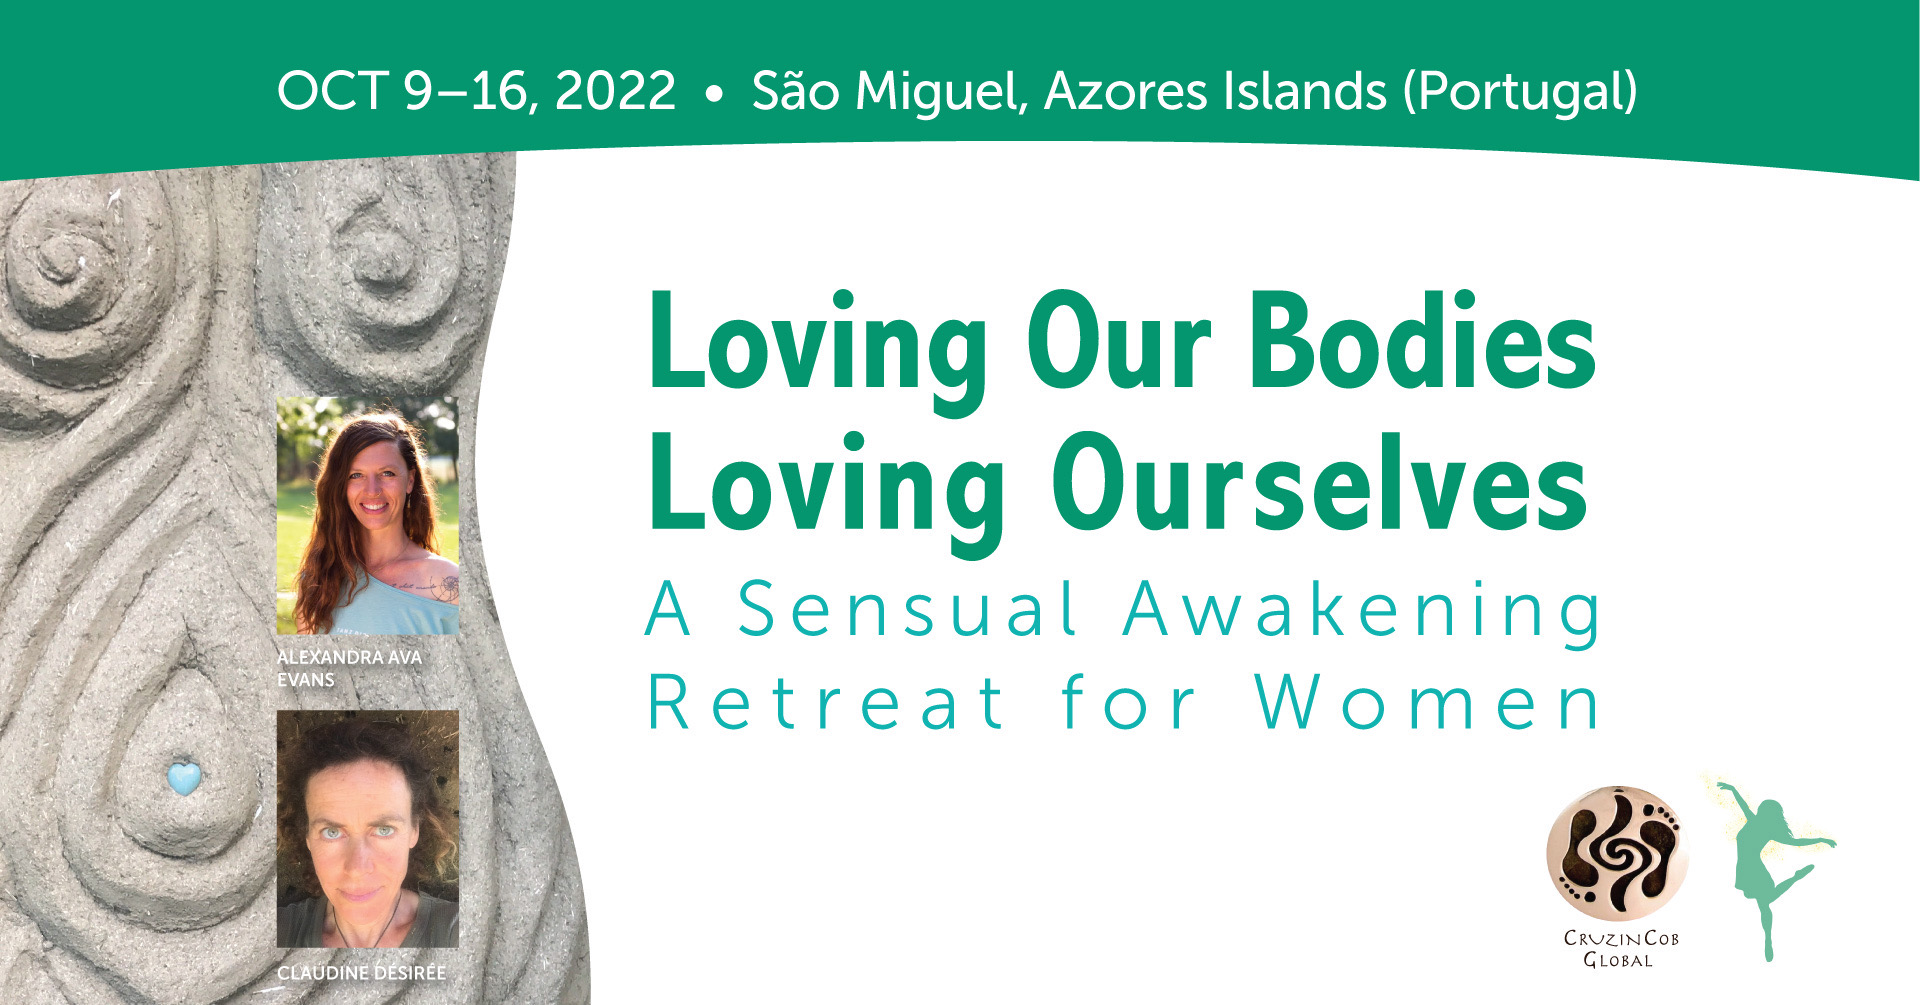 Loving Our Bodies, Loving Our Selves: A Sensual Awakening Retreat for Women in the Azores Islands, Portugal